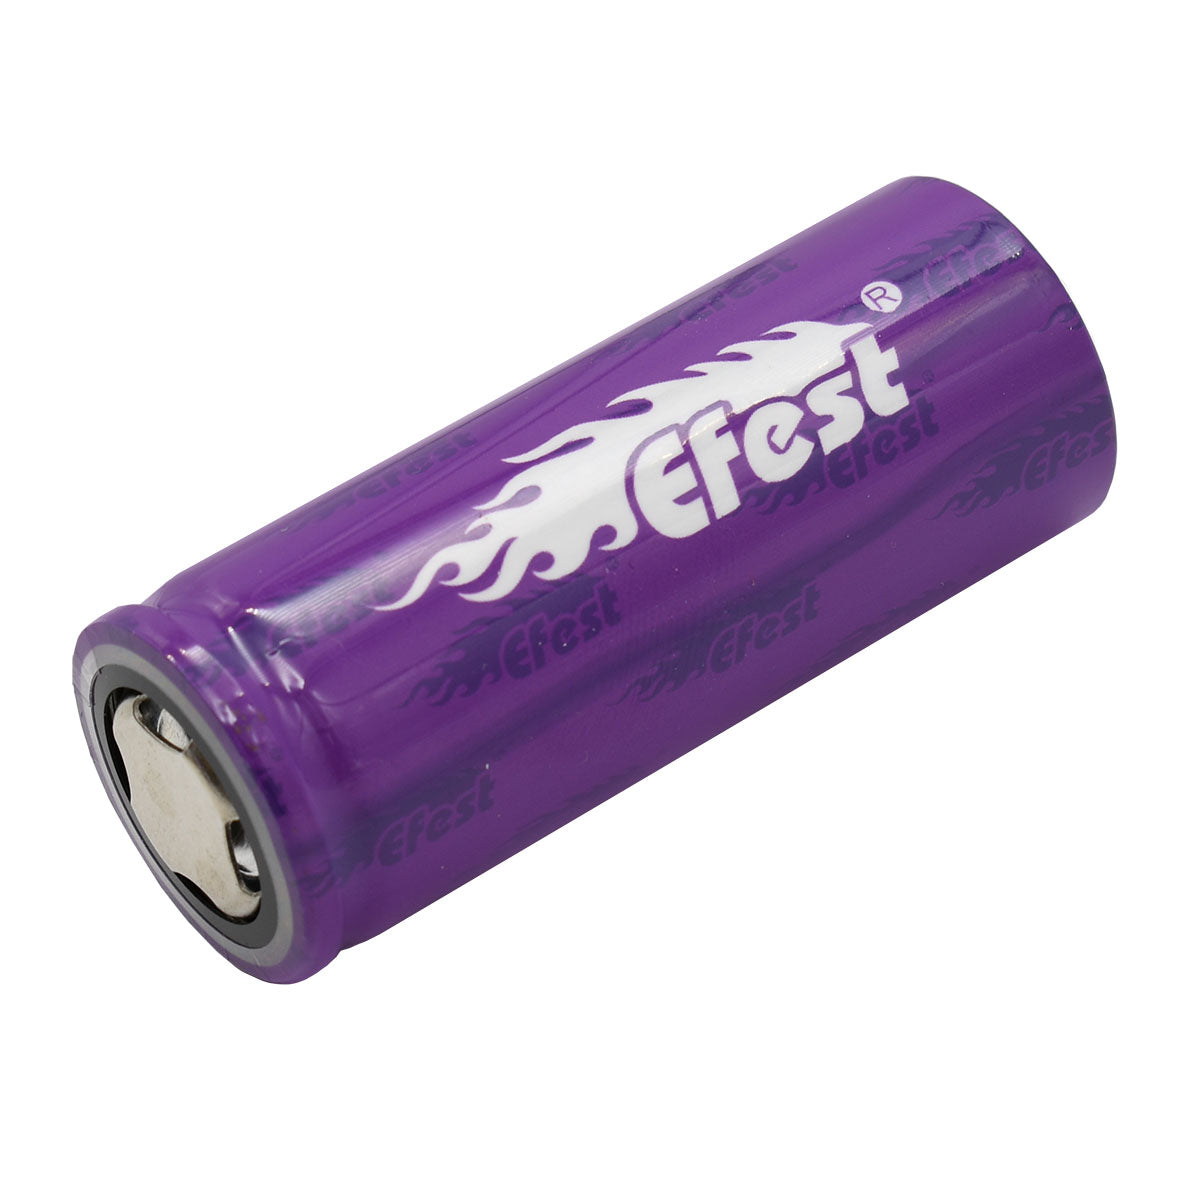 IMR 26650 3.7V 4200mAh Rechargeable Battery